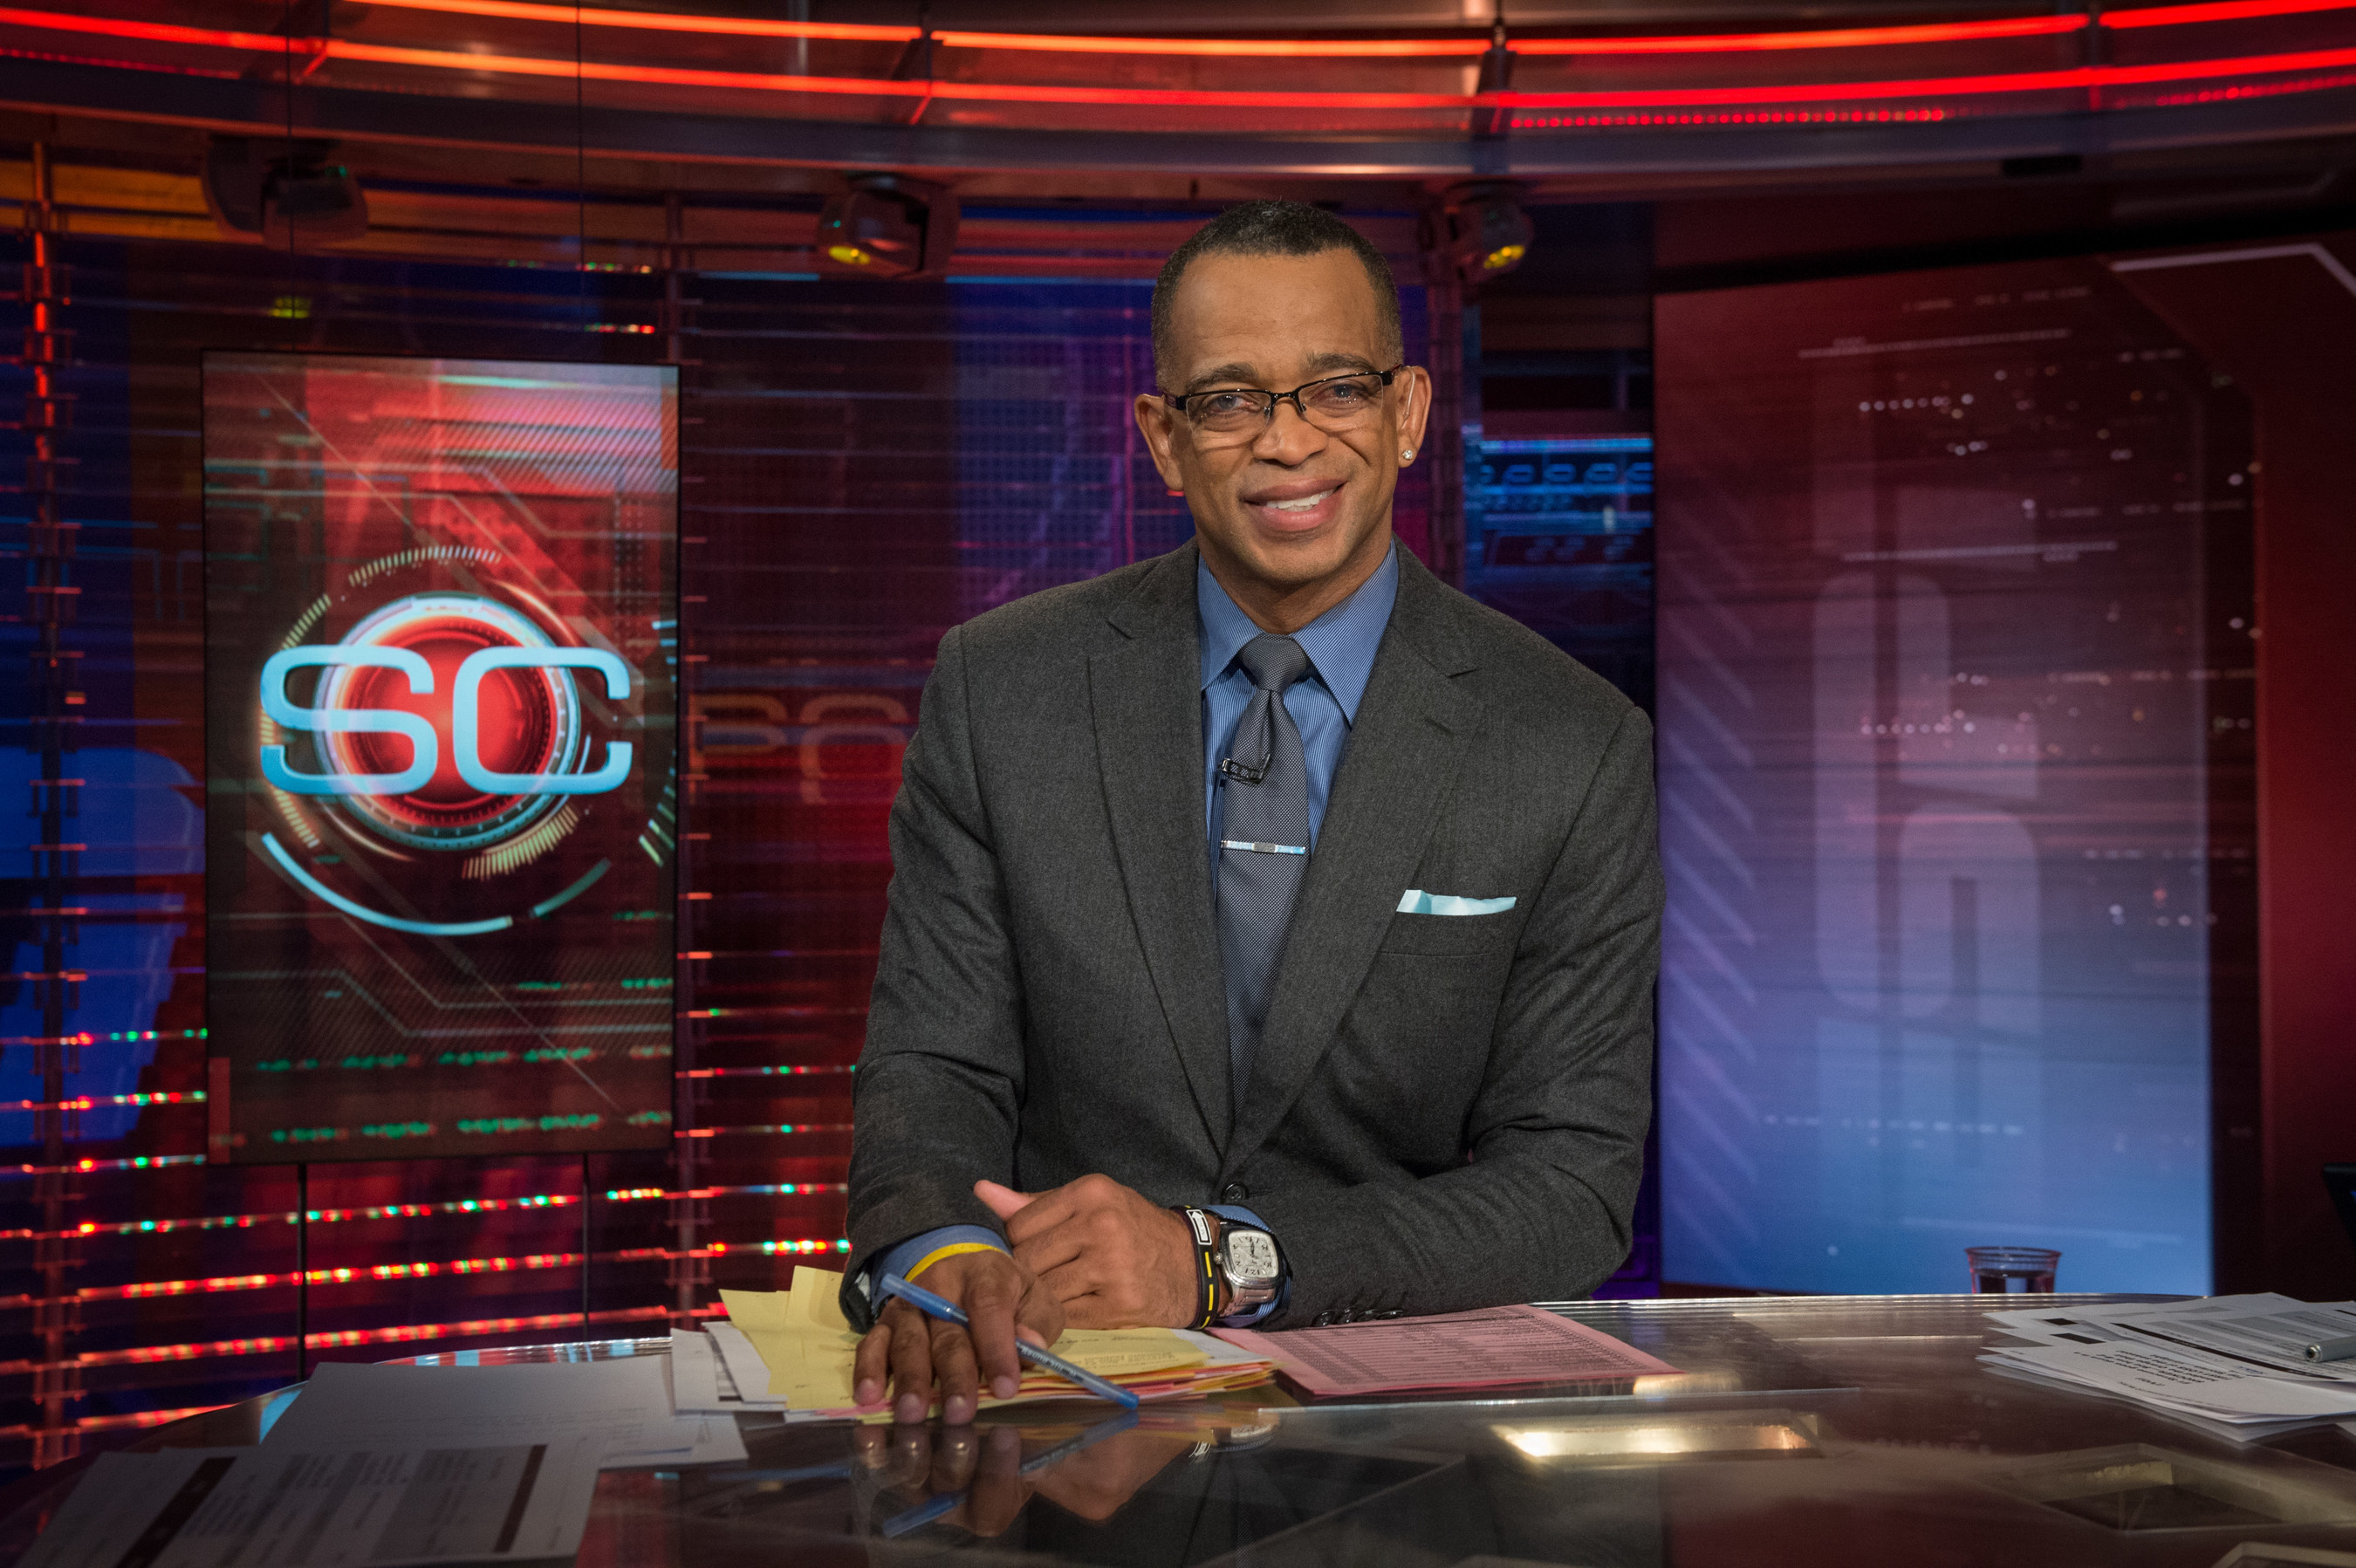 The late ESPN anchor, Stuart Scott to be posthumously awarded the 2015 Mickey Leland Humanitarian Achievement Award by the National Association for Multi-ethnicity in Communications. The award will be presented at the NAMIC Annual Awards Breakfast scheduled for May 7, 2015 in Chicago. The NAMIC Annual Awards Breakfast is held annually in conjunction with INTX: The Internet and Television Expo.